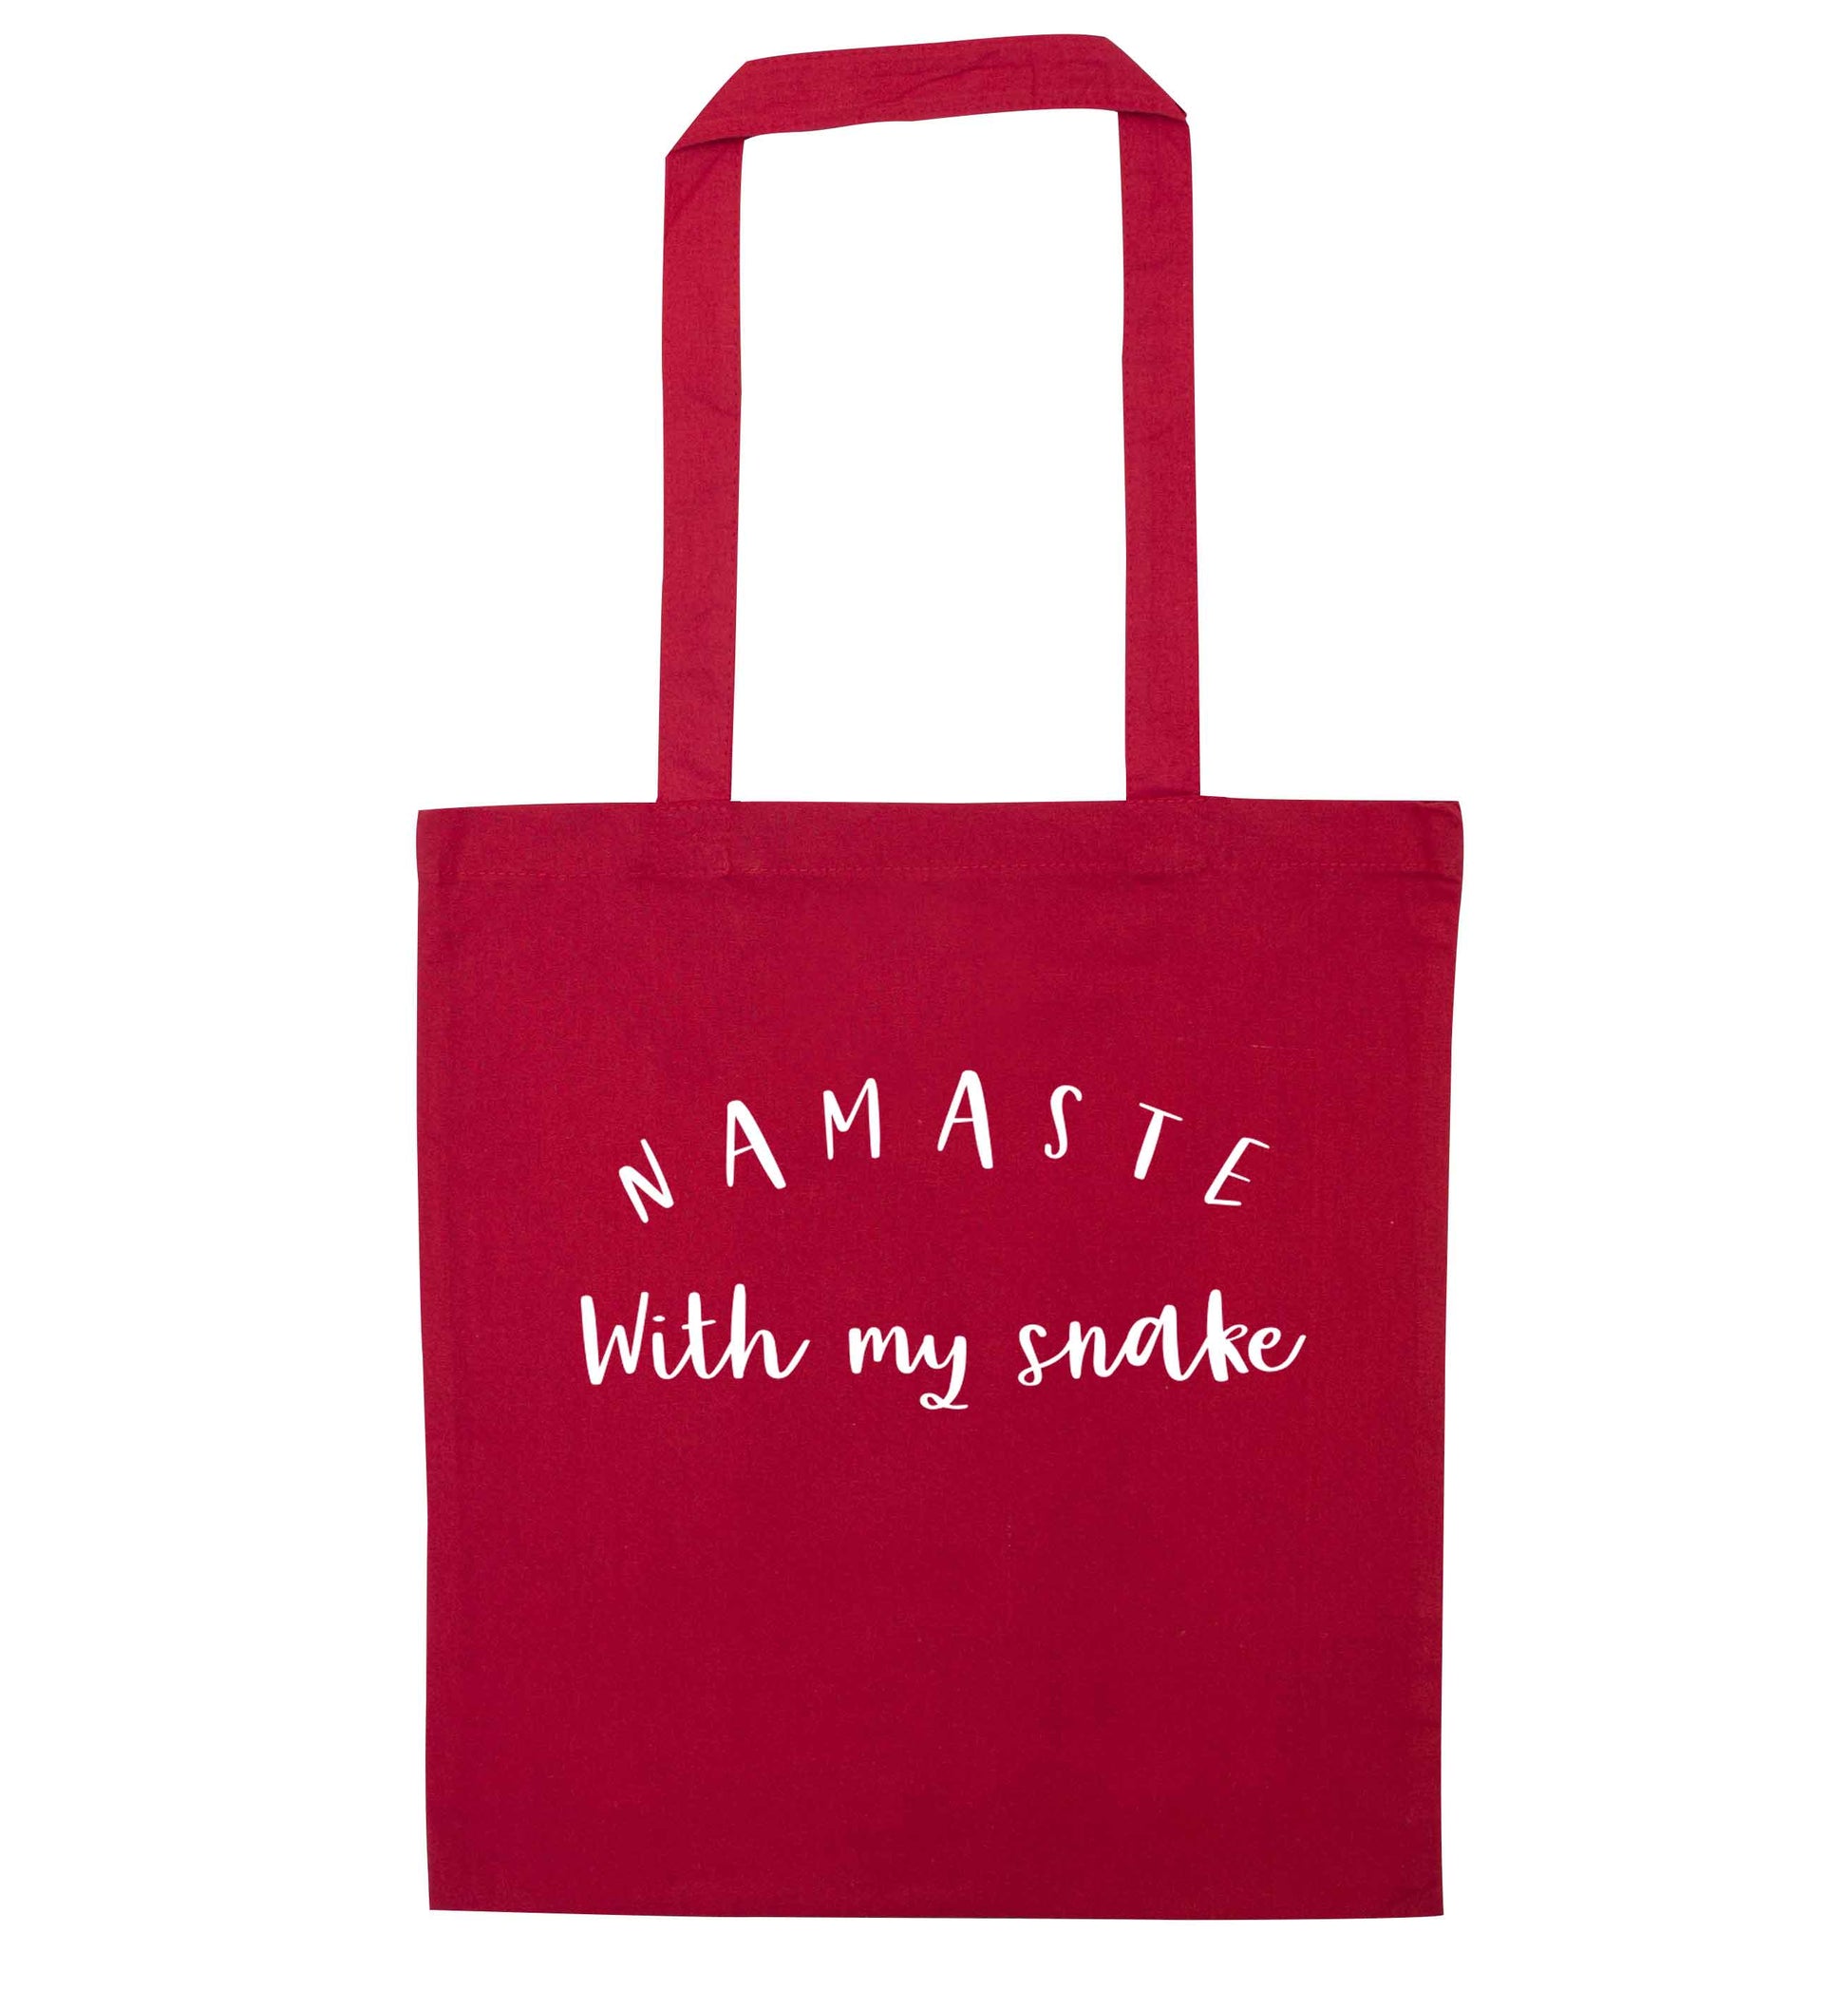 Namaste with my snake red tote bag